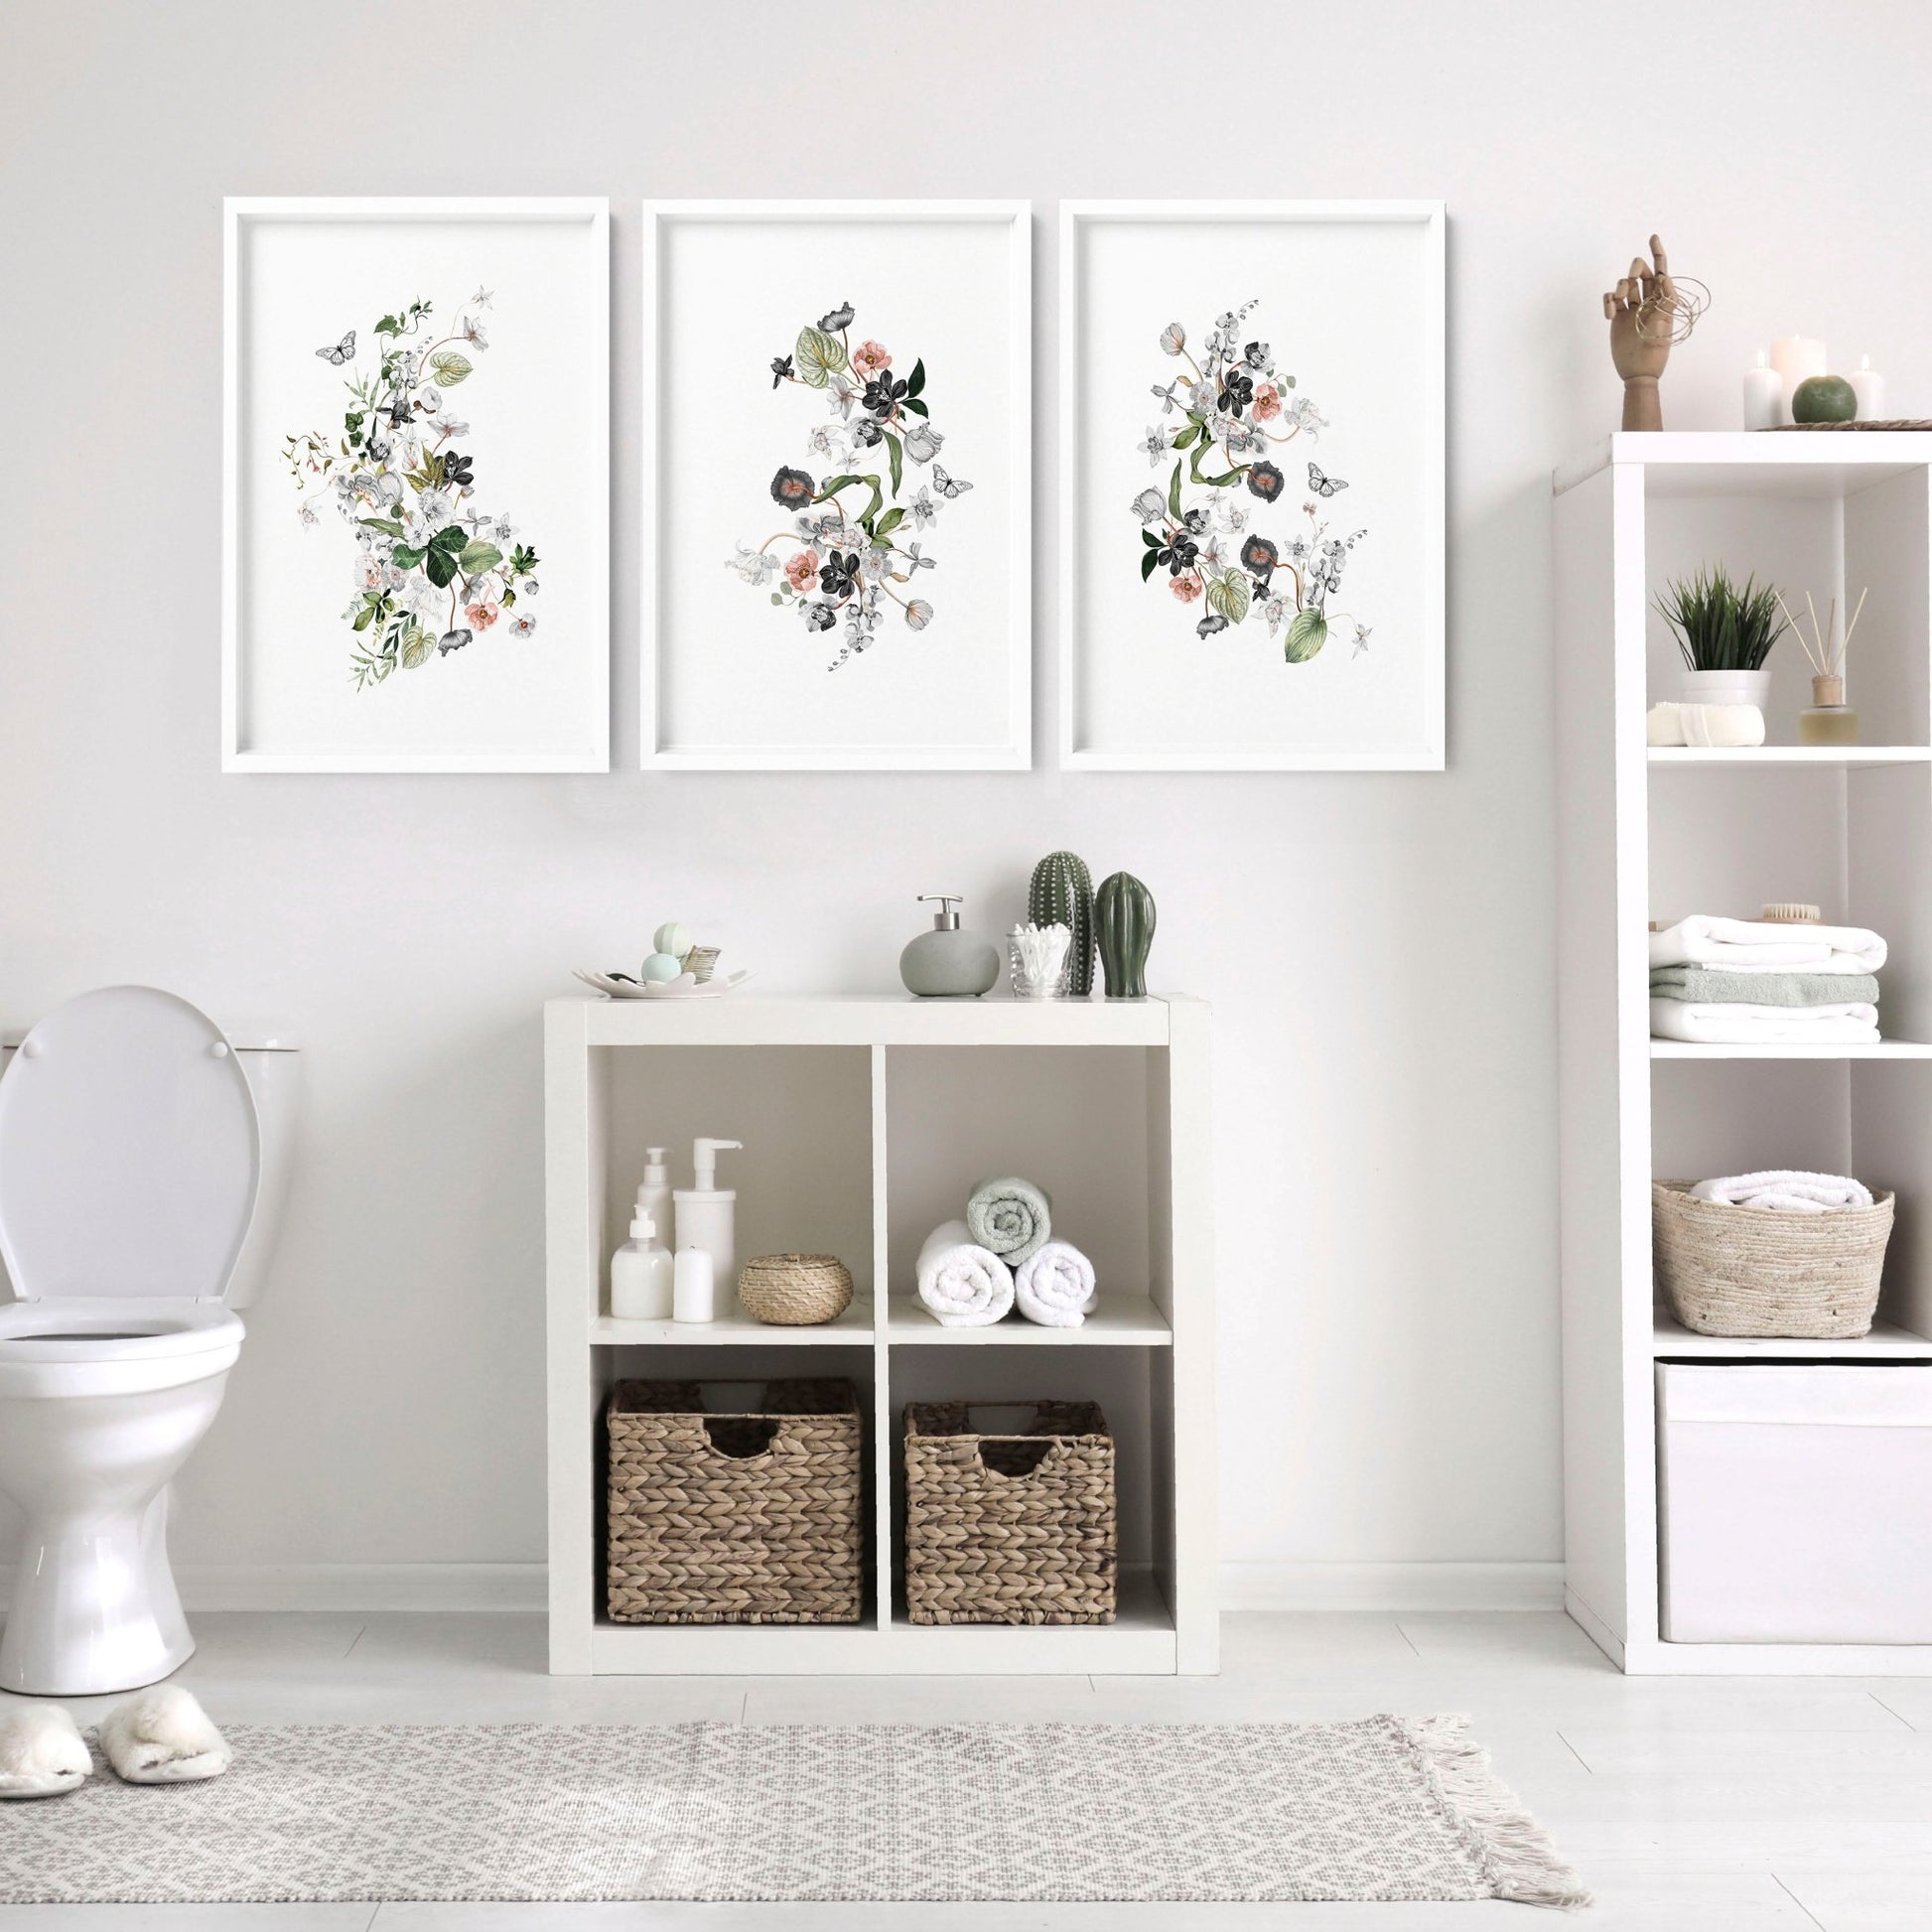 Bathroom framed pictures | set of 3 Shabby Chic wall prints